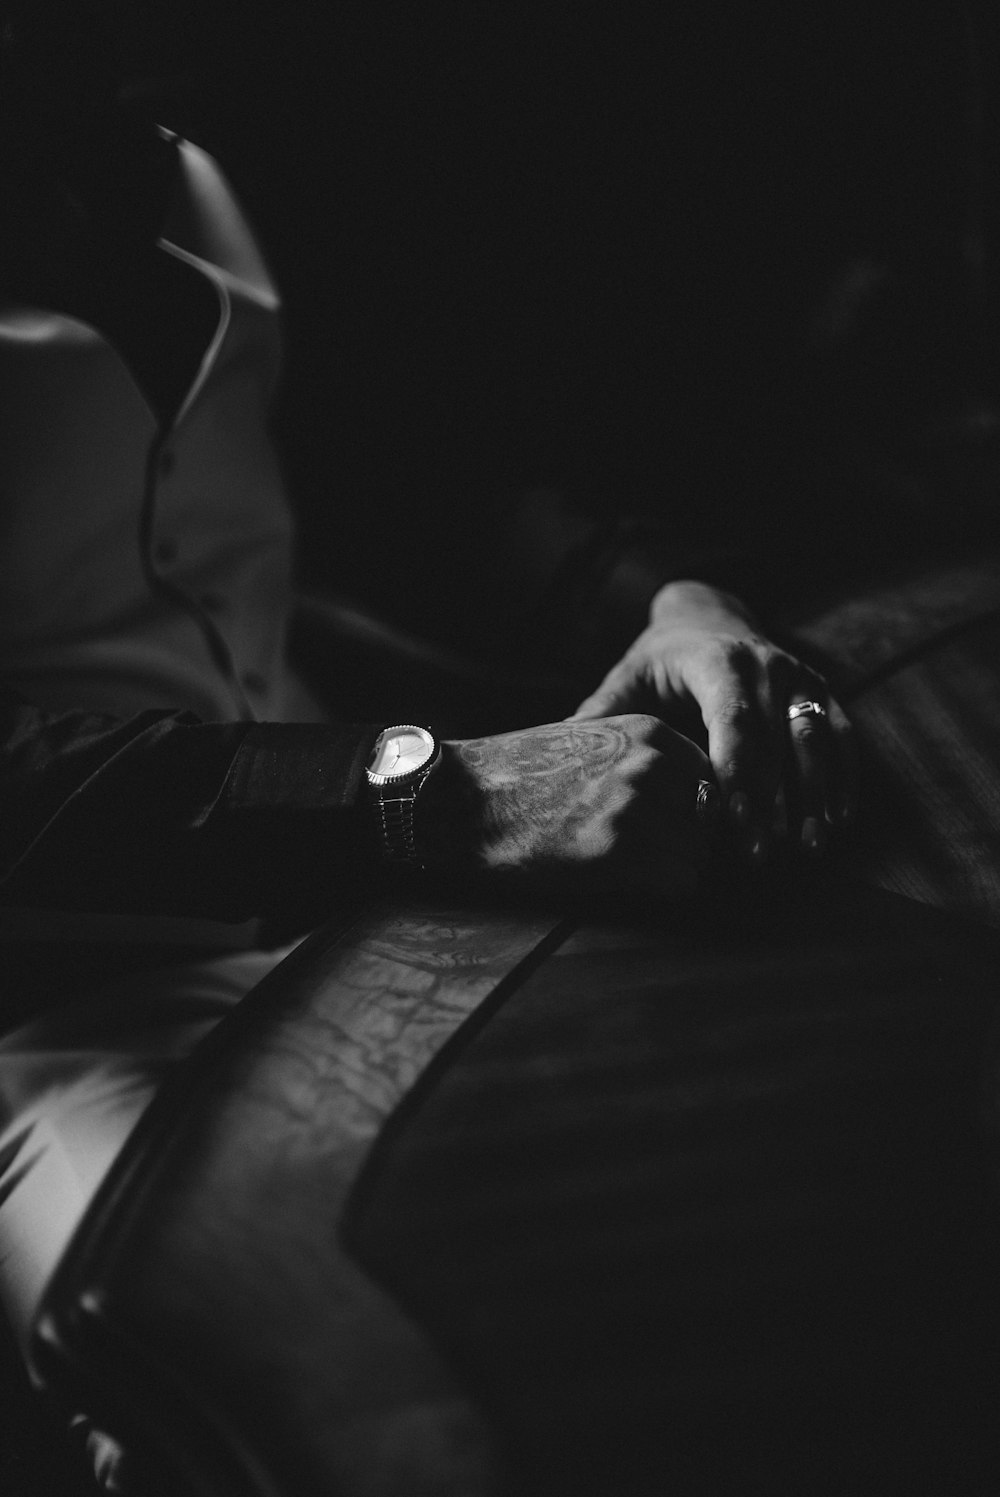 a black and white photo of a person's hand resting on a chair